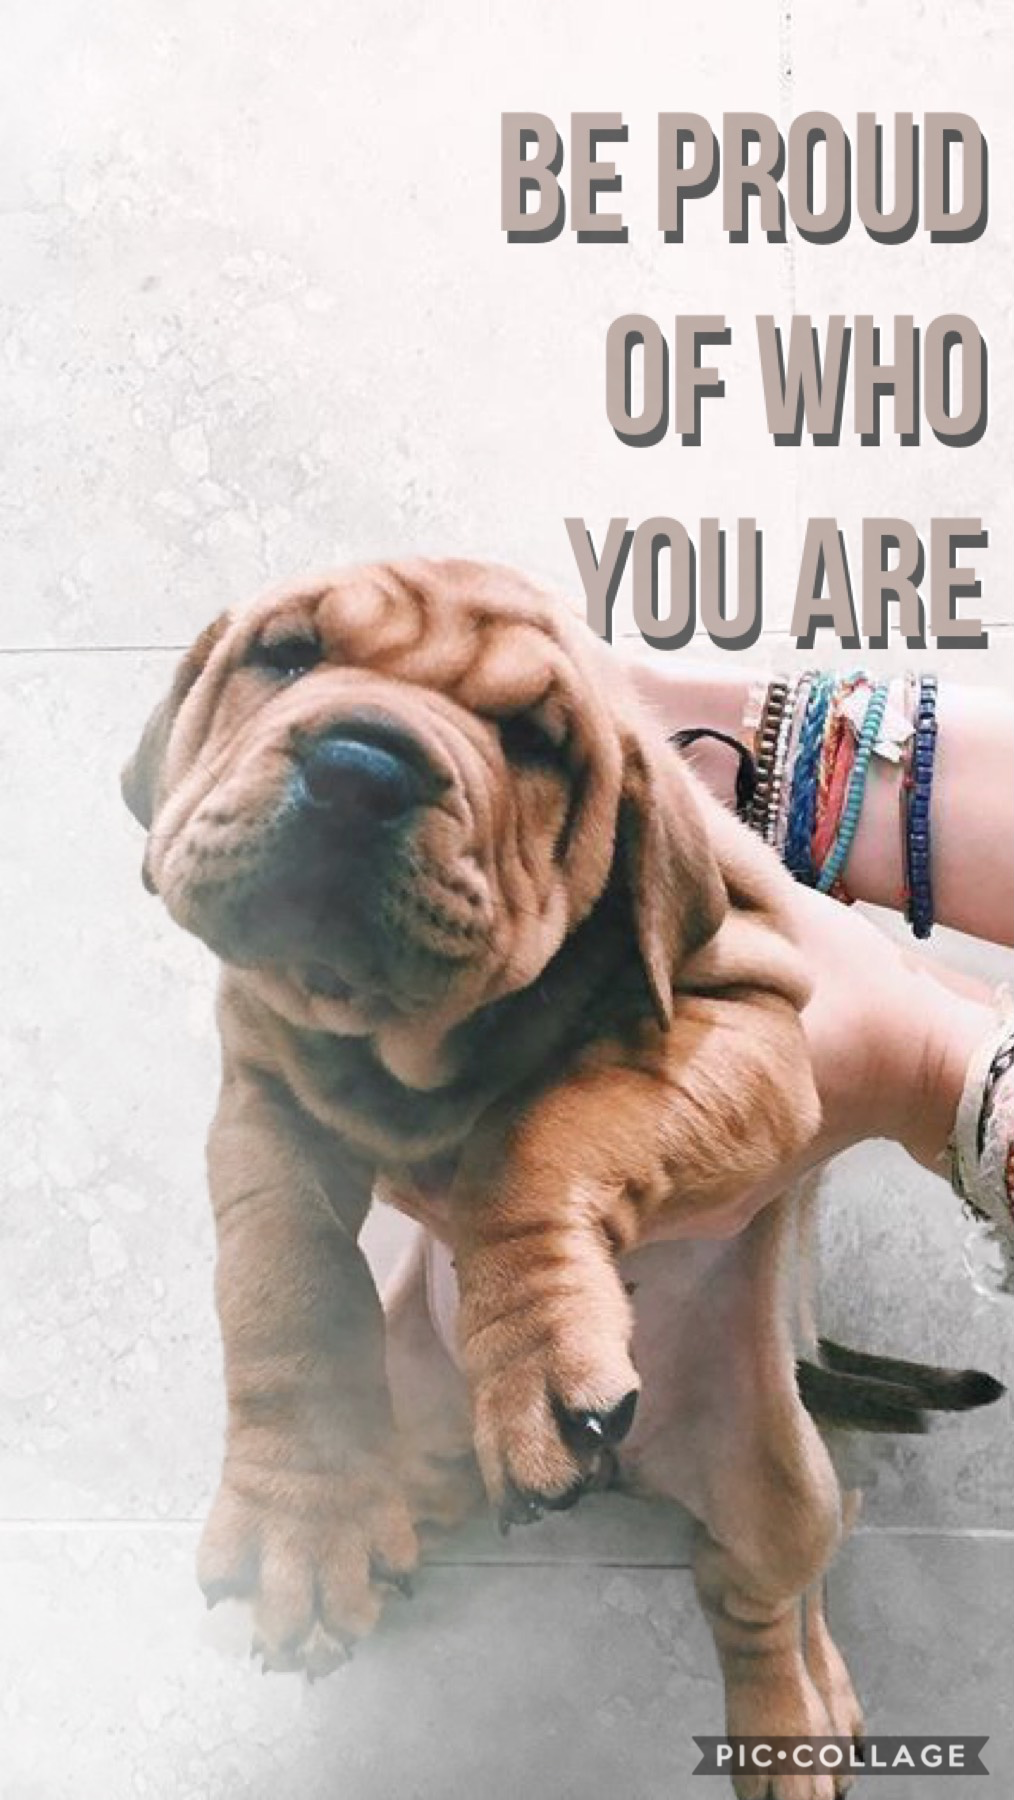 Be proud of who you are! - Bleu💙